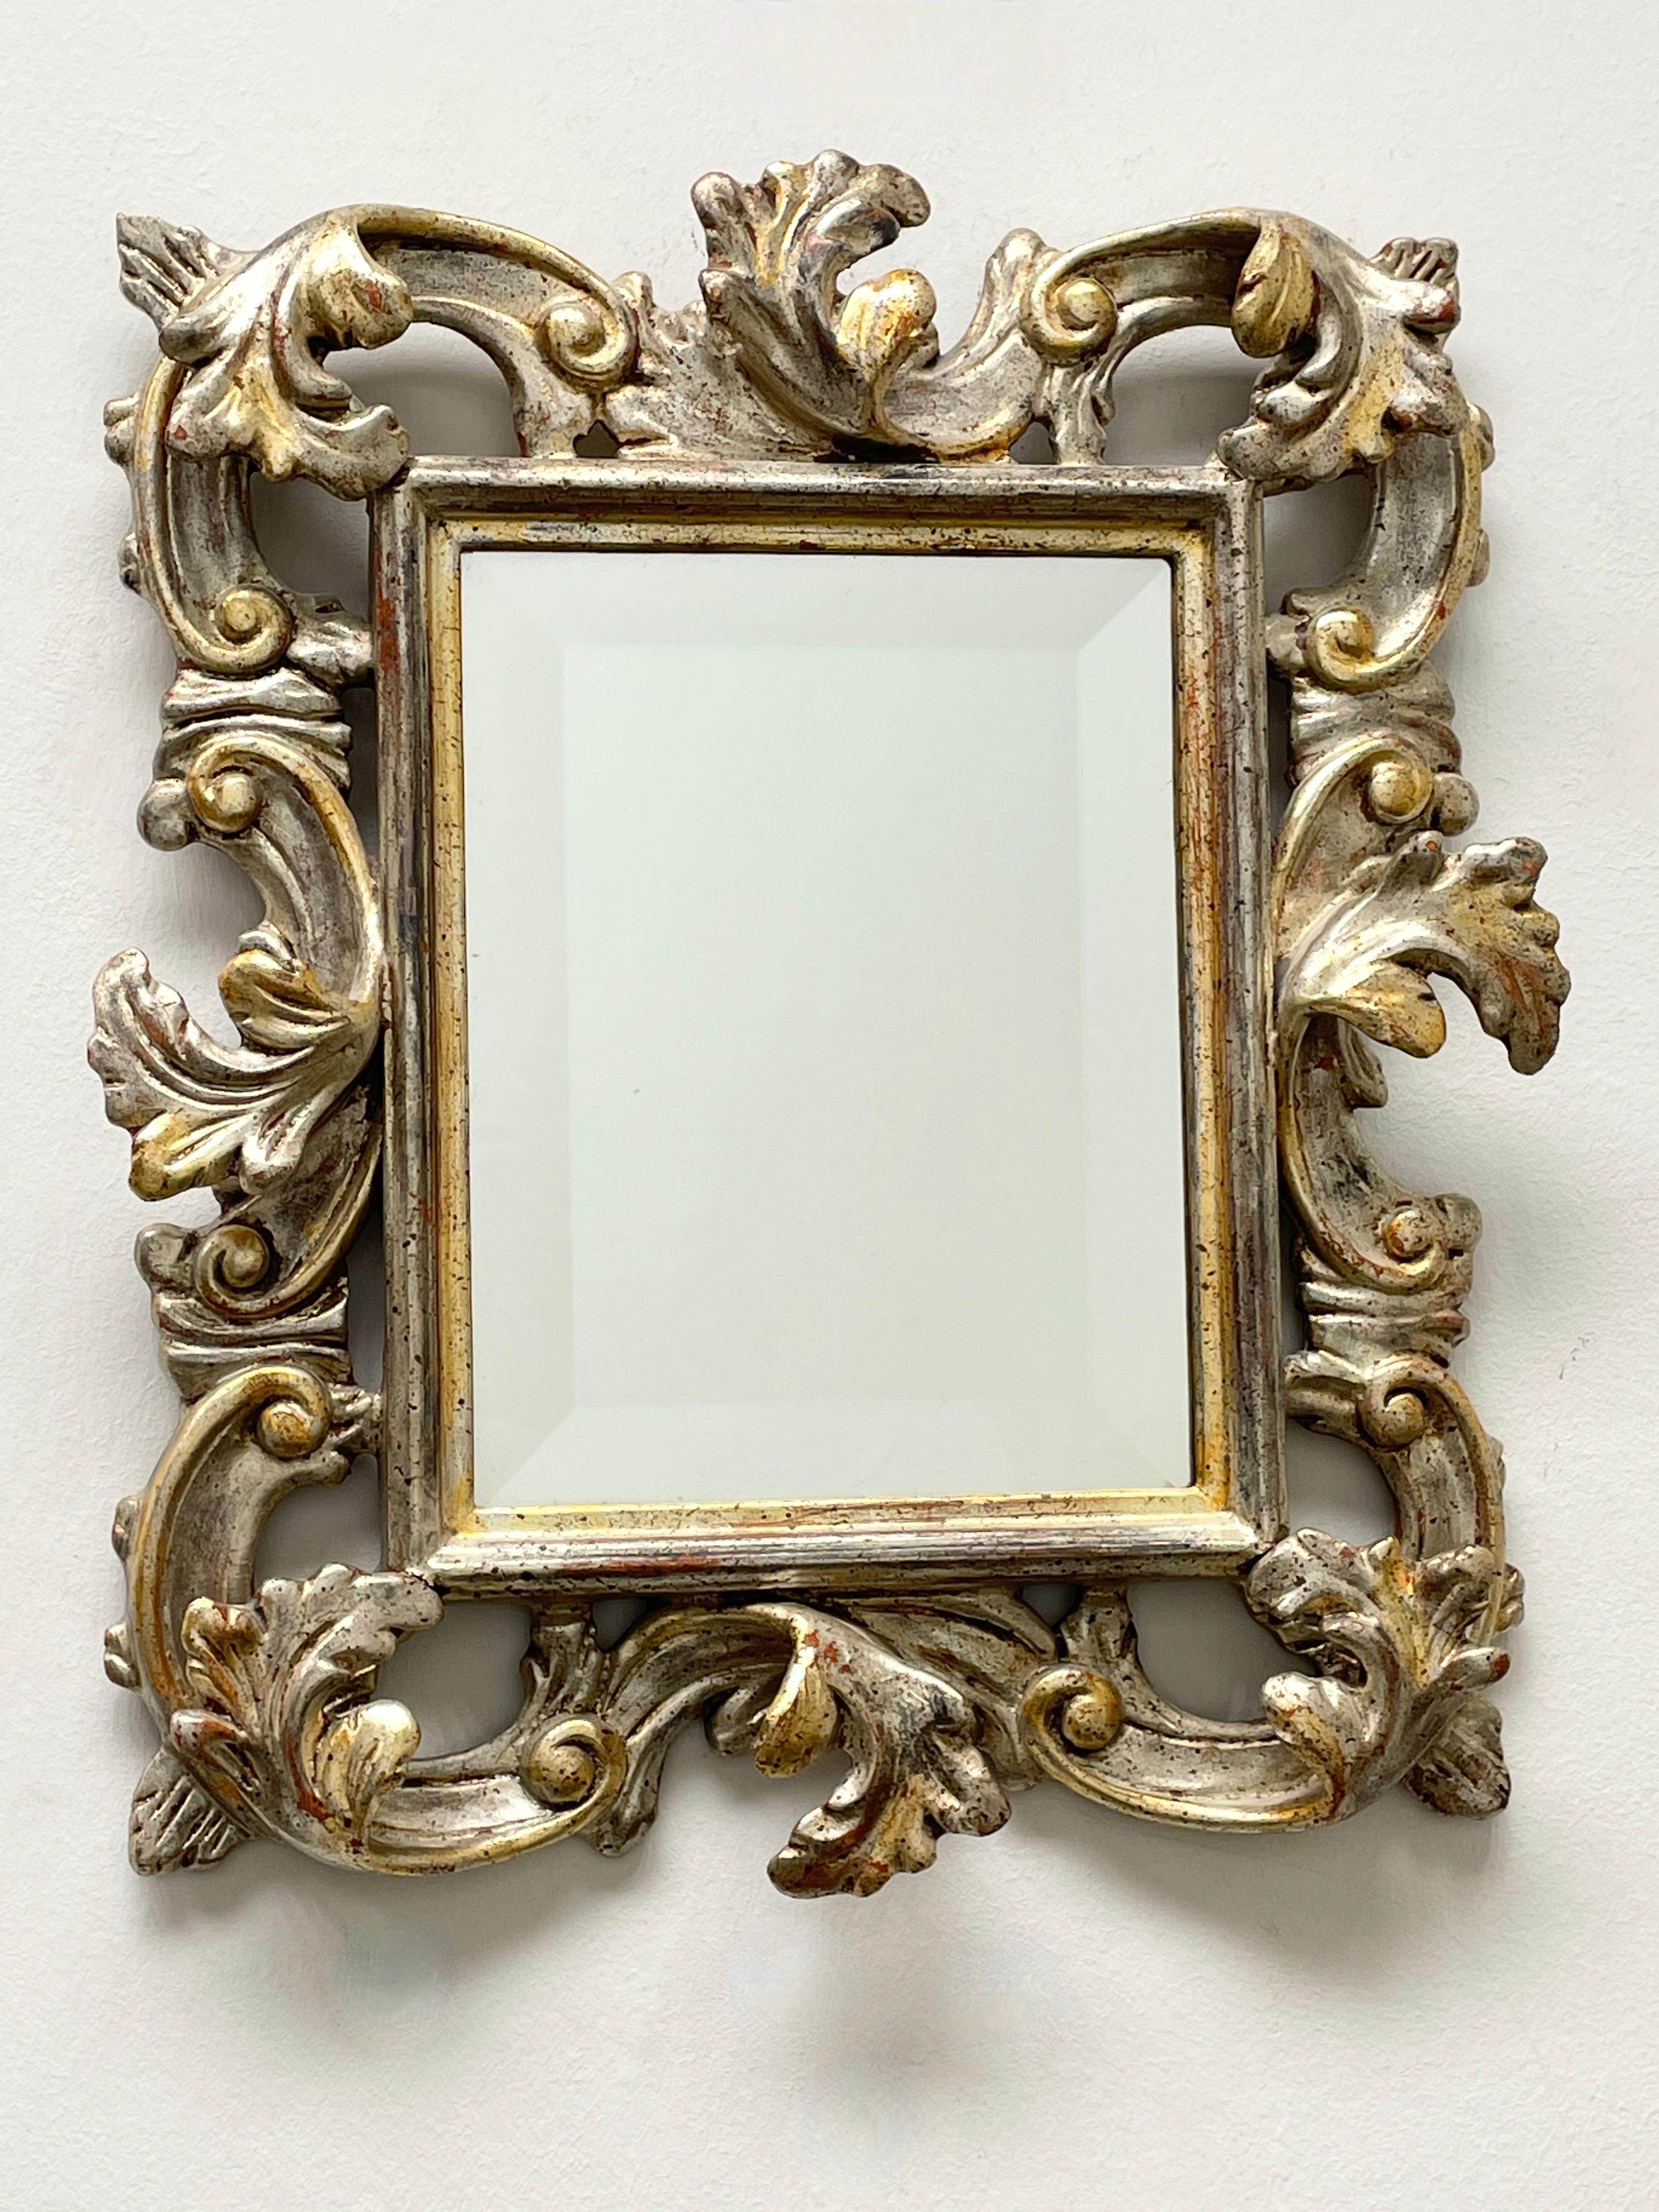 Stunning Hollywood Regency style toleware mirror. The gilt and silvered hand carved wooden frame surrounds a glass mirror. Mirror itself measures approx. 9 inches high and 7 inches wide. Made in Germany, in the 1930s or older. Beautiful small Mirror